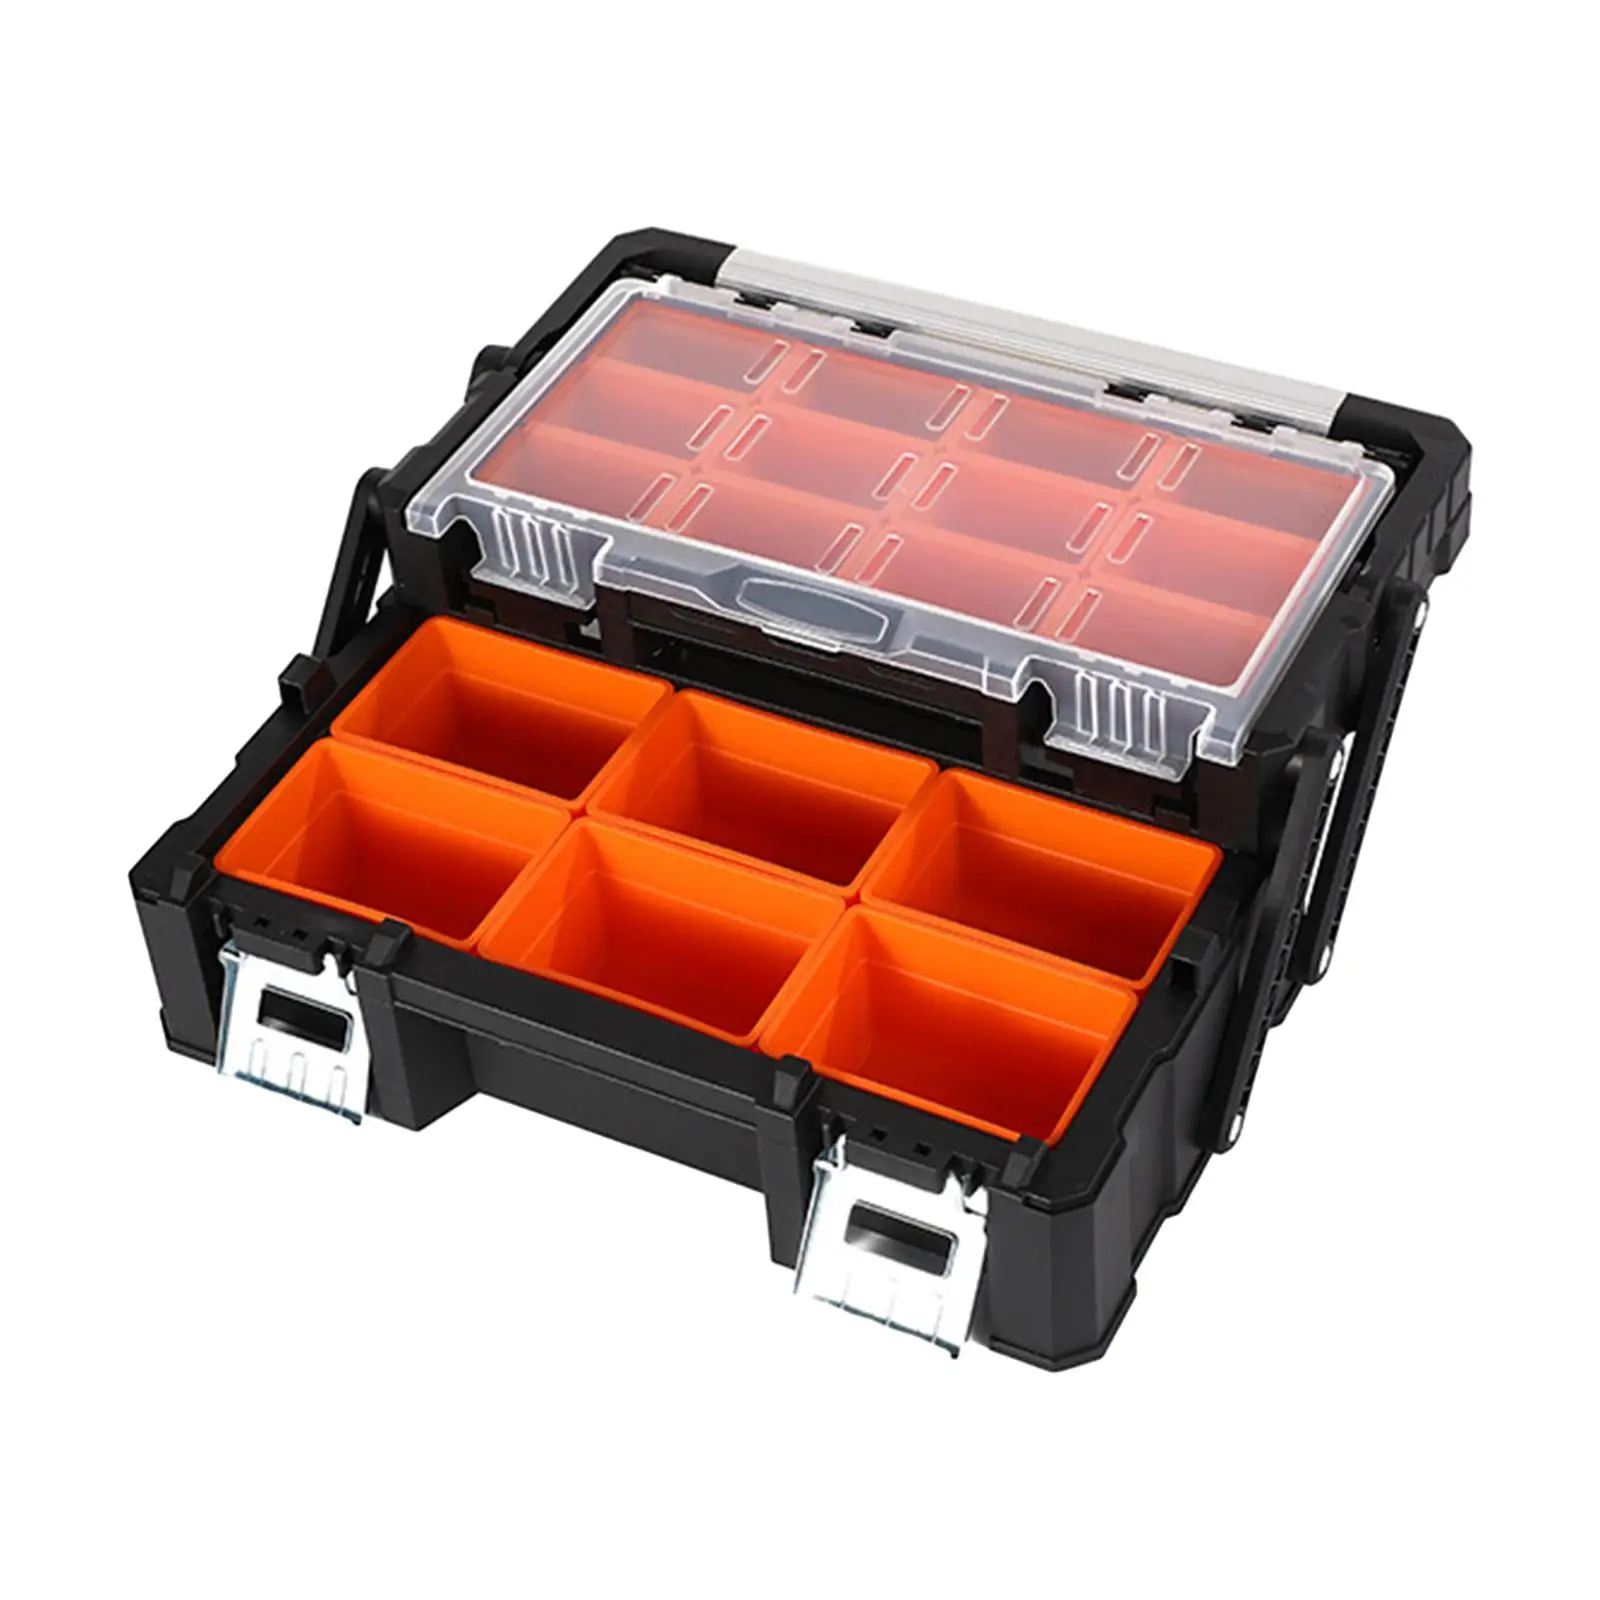 Toolbox Practical Auto Tool Box Multifunction Home Use Durable Hardware Storage Box for Camping Office Fishing Hiking Outdoor